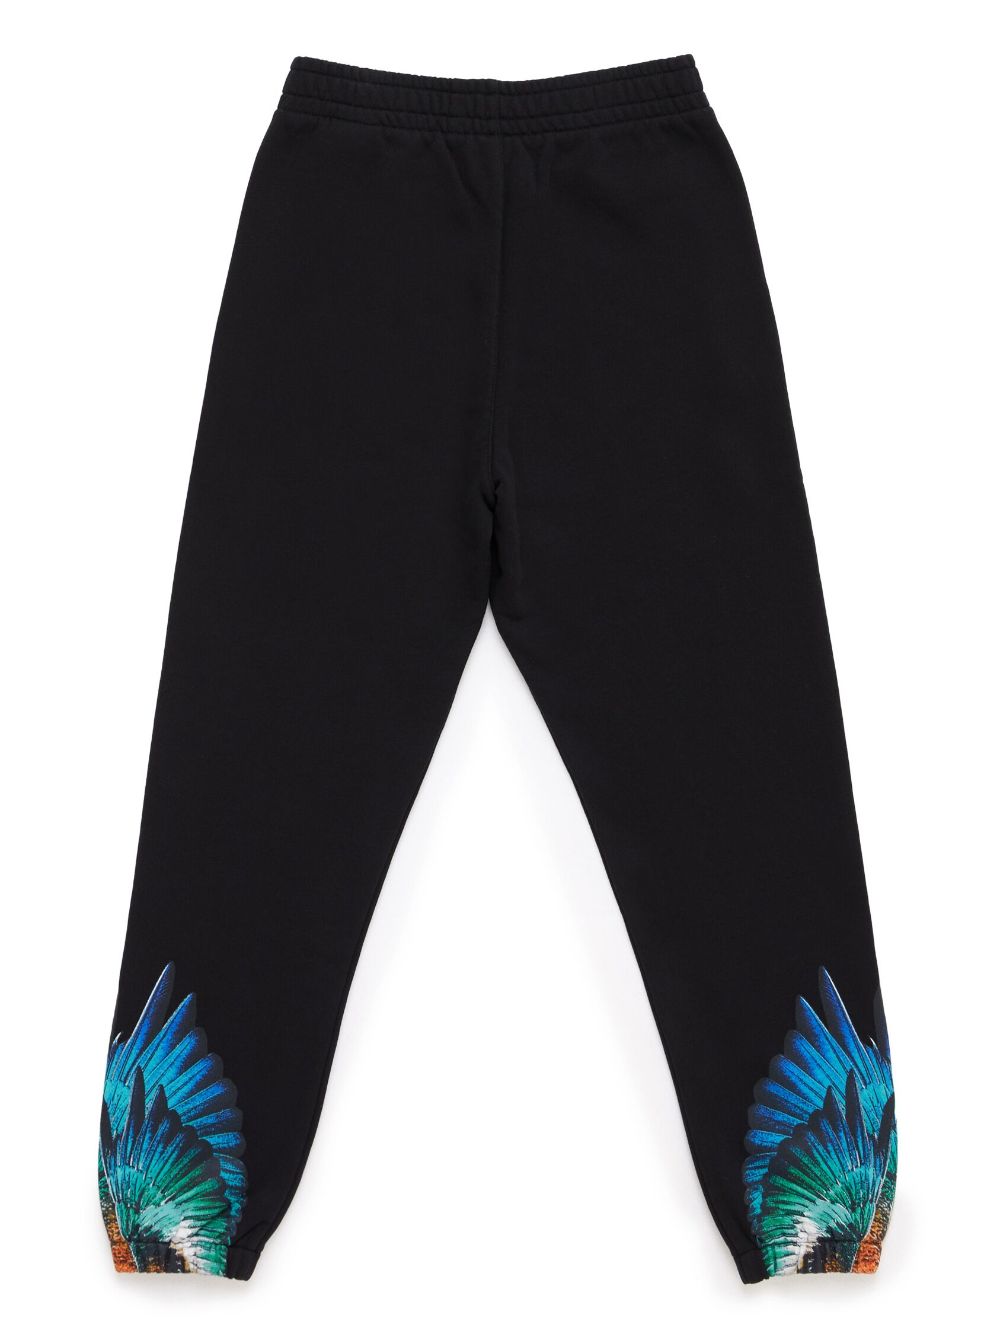 Black sports trousers with blue wings